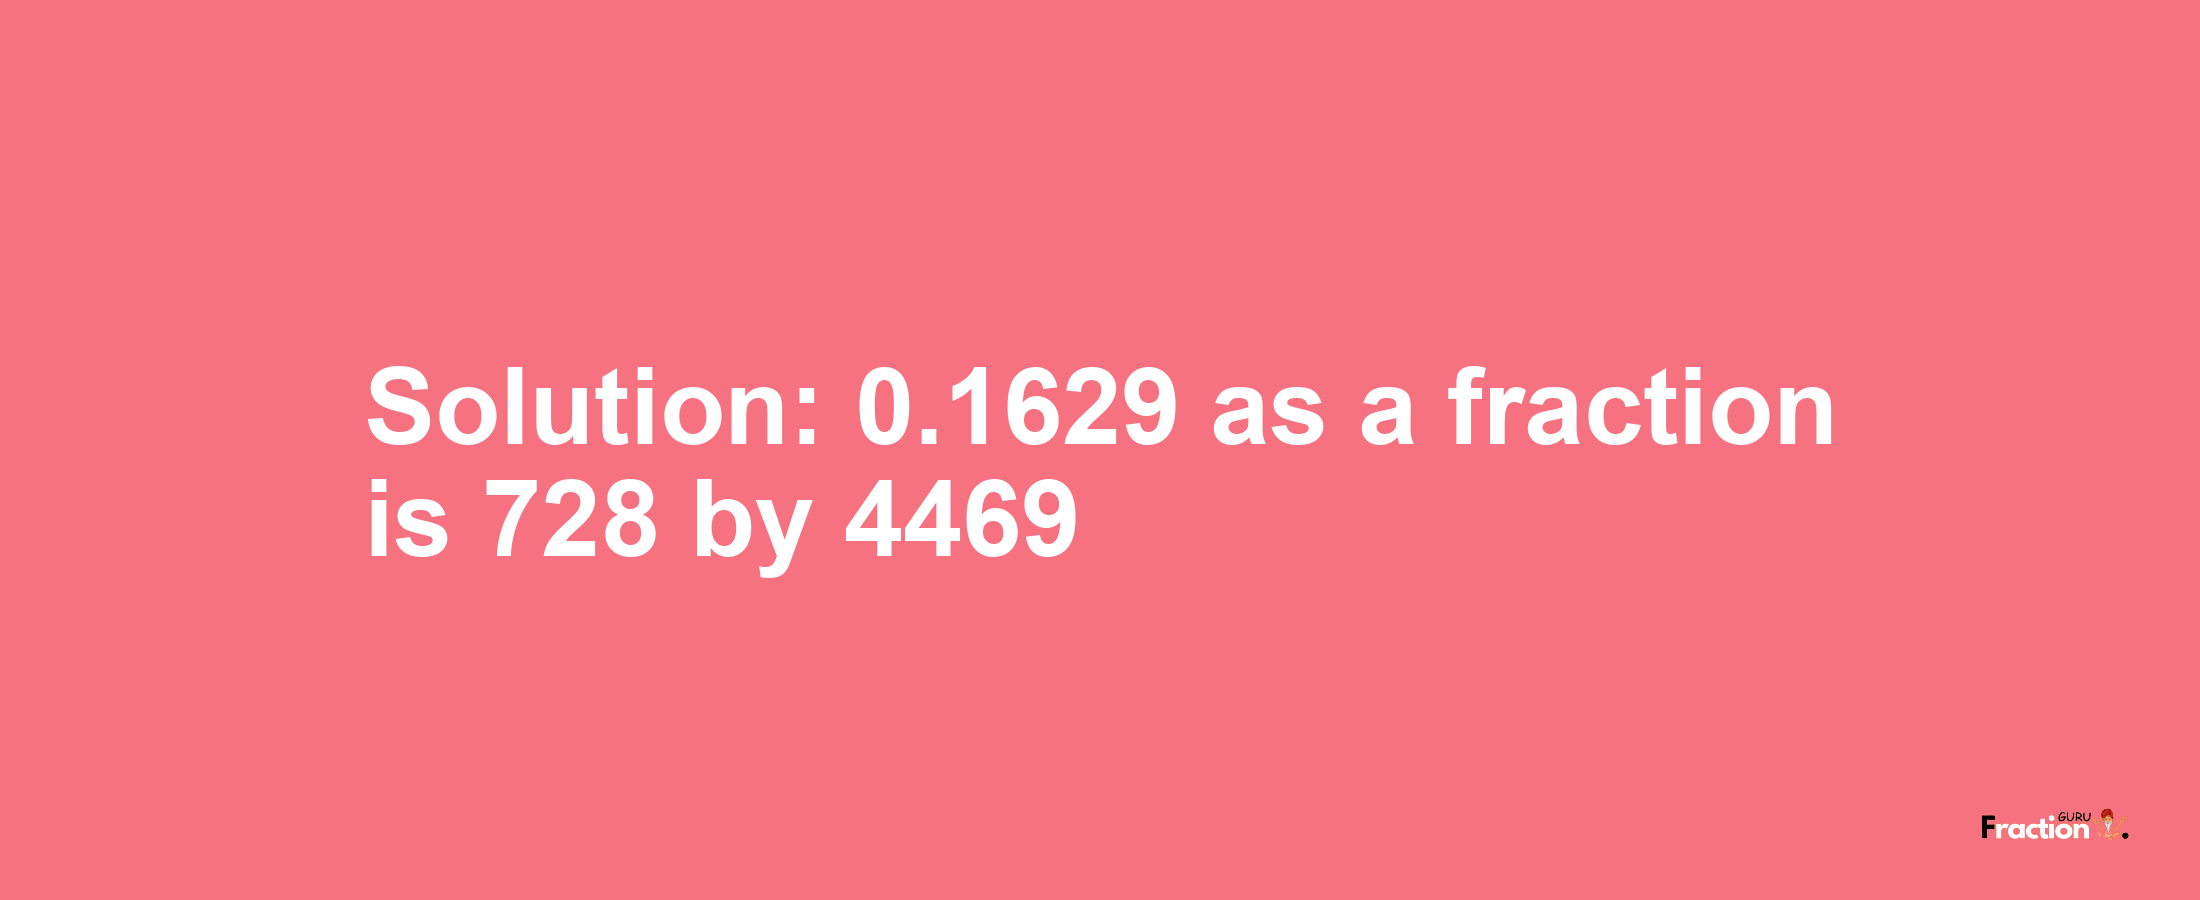 Solution:0.1629 as a fraction is 728/4469